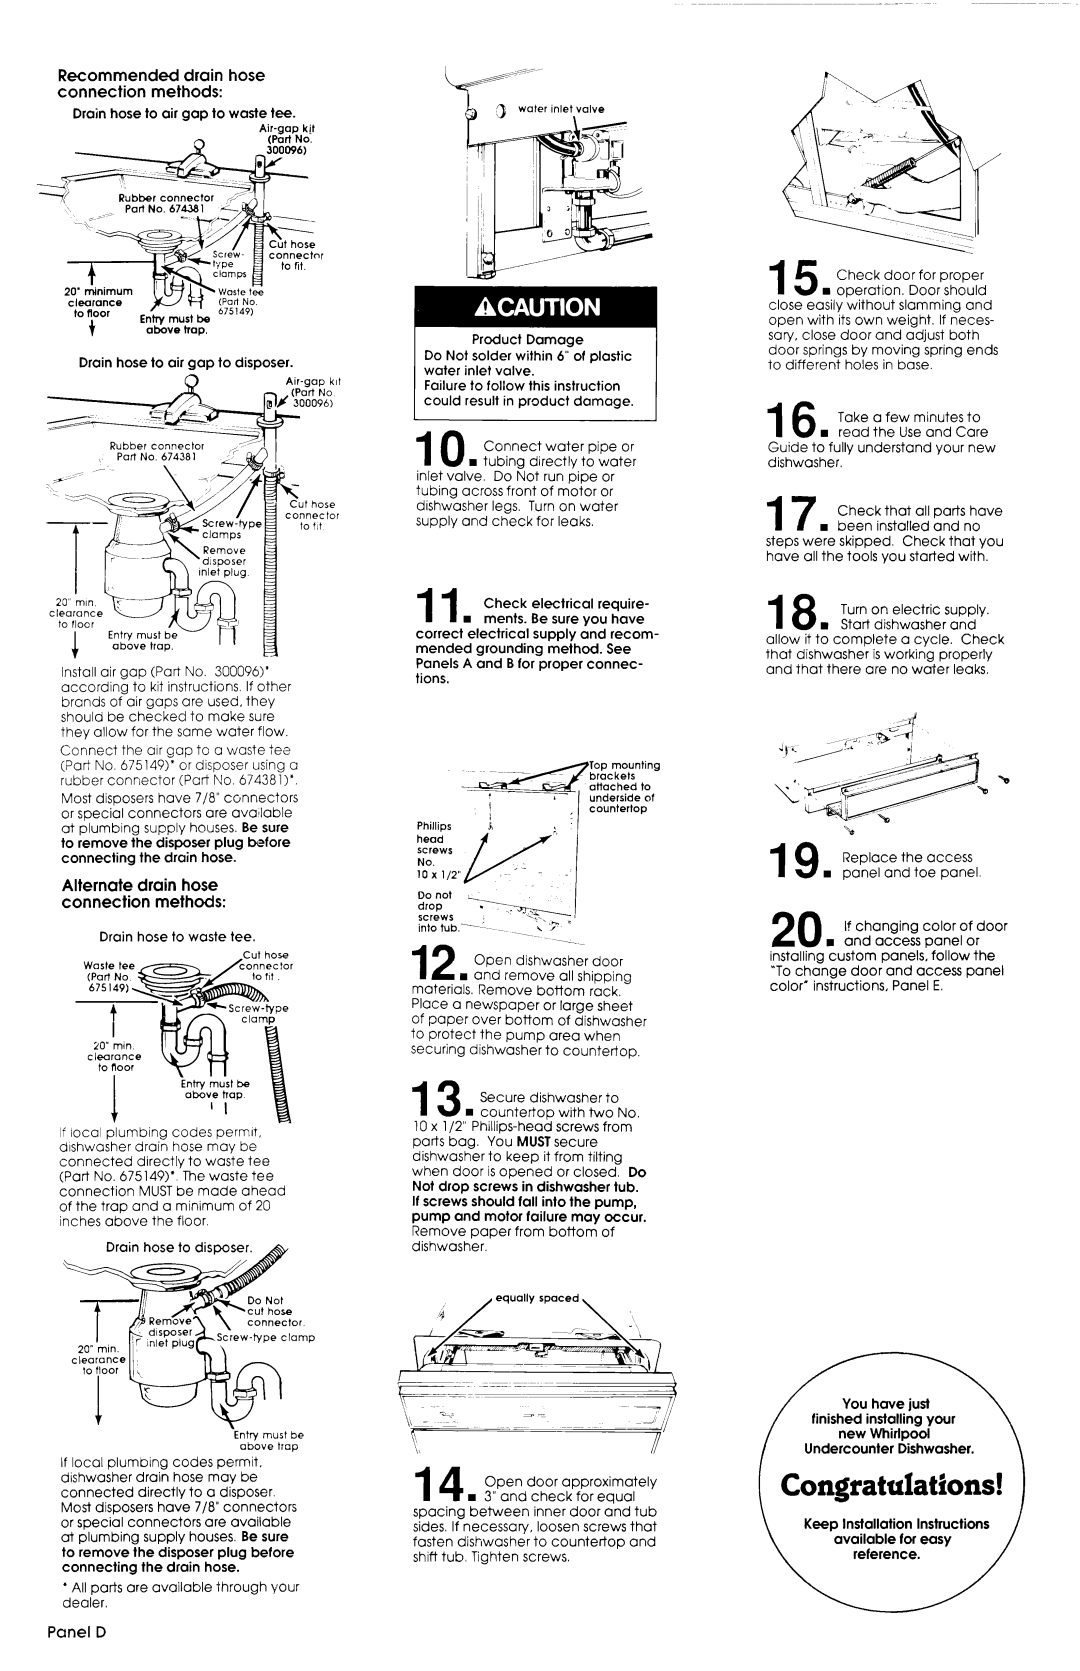 Whirlpool 3369089 Recommended drain hose connection methods, Alternate drain hose connection methods, Panel D 